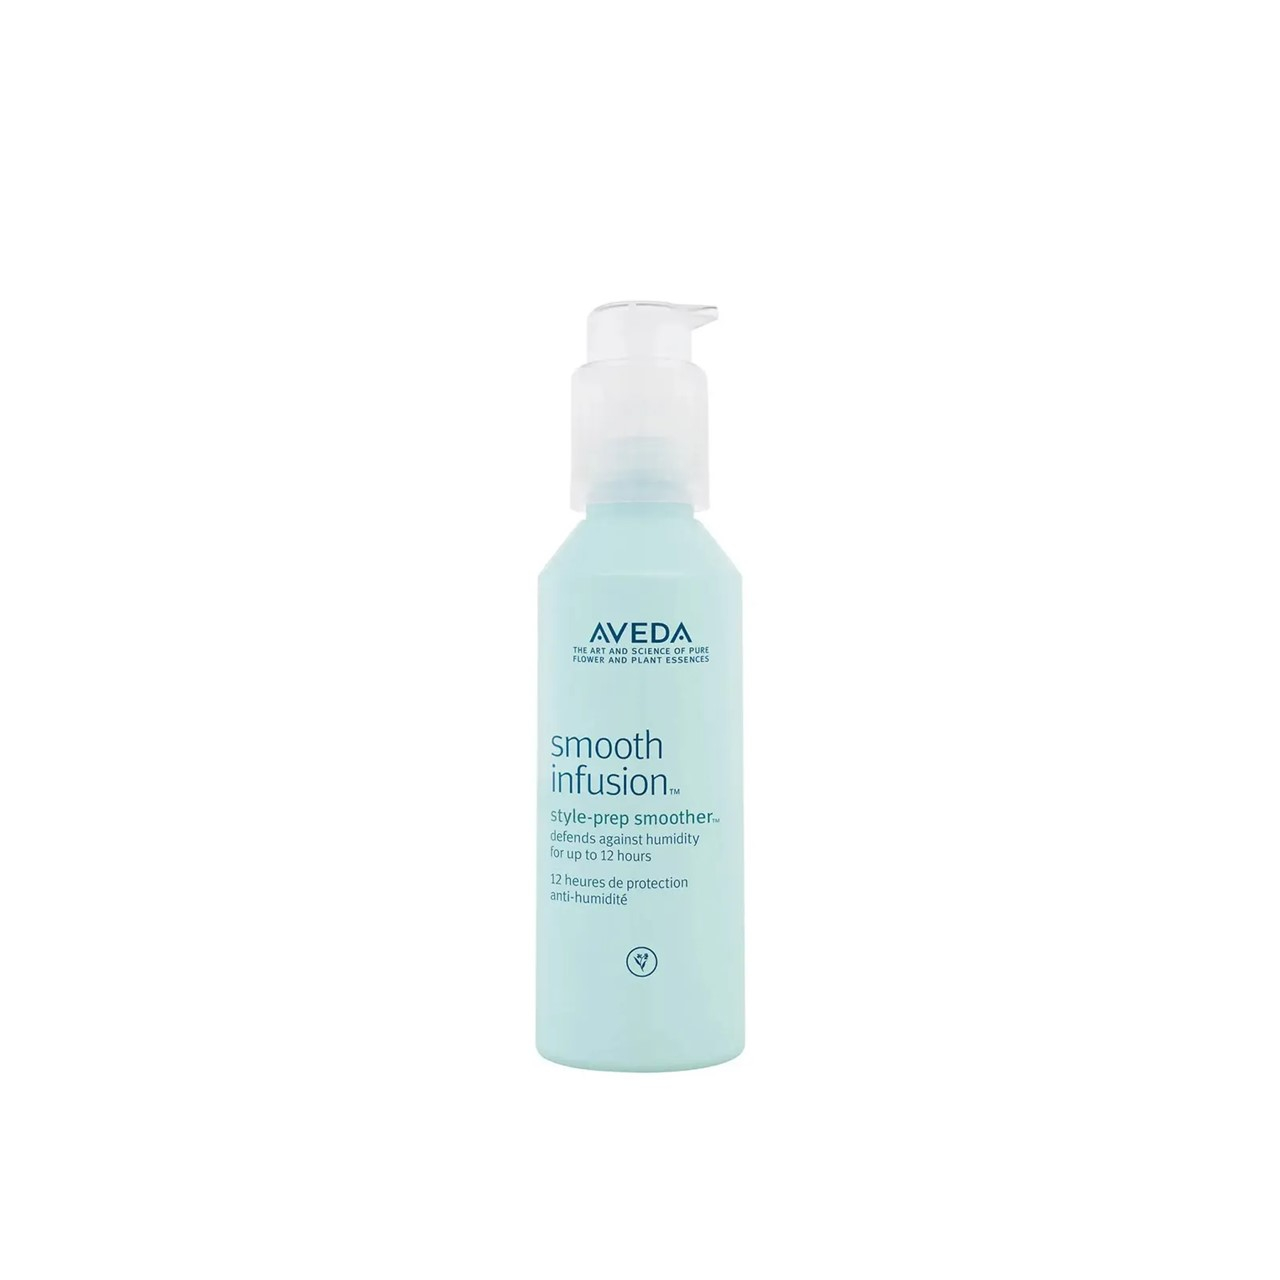 Aveda Smooth Infusion Style-Prep Smoother 100ml (3.4 fl oz)